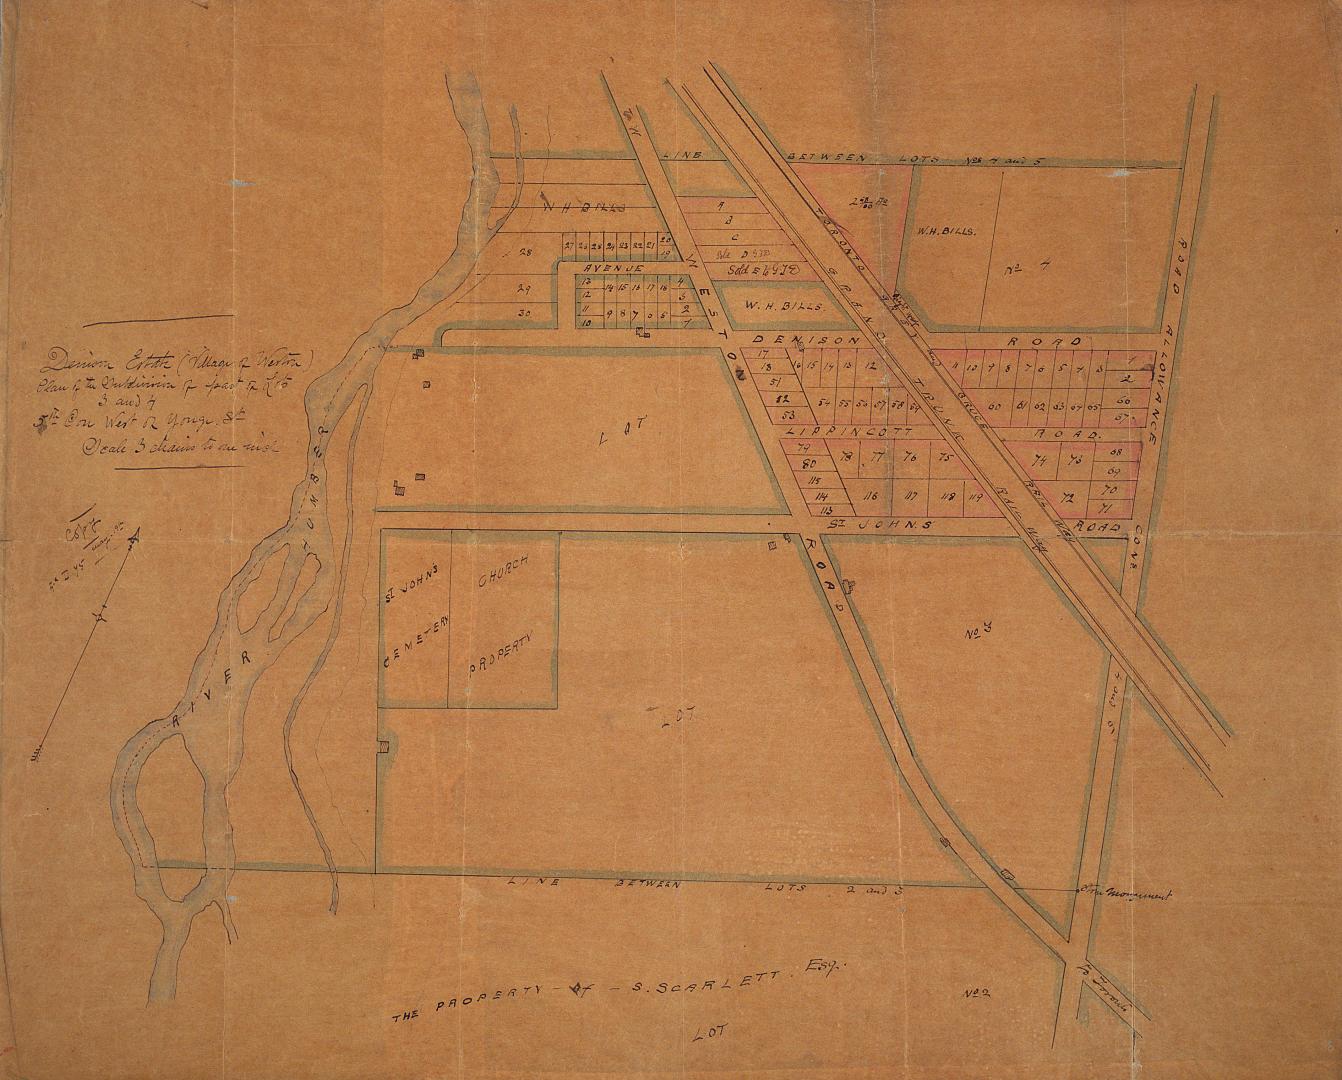 Denison Estate (Village of Weston), plan of the subdivision of part of lots 3 and 4, 5th con west of Yonge St.